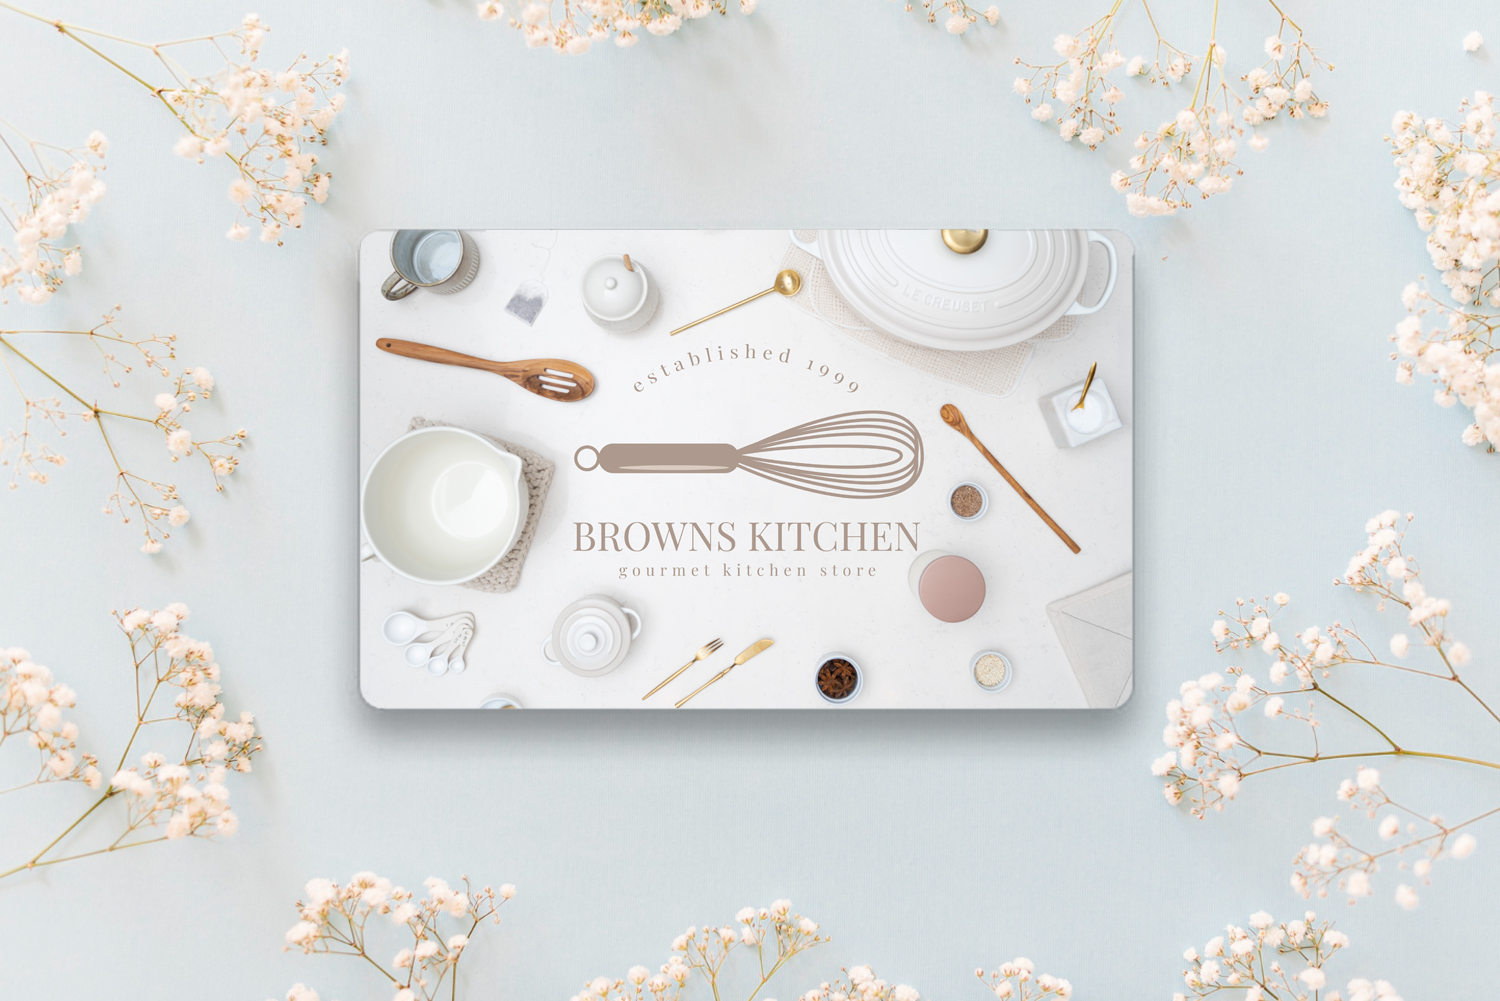 A Browns Kitchen Gift Card on a light blue background, surrounded by baby's breath flowers.